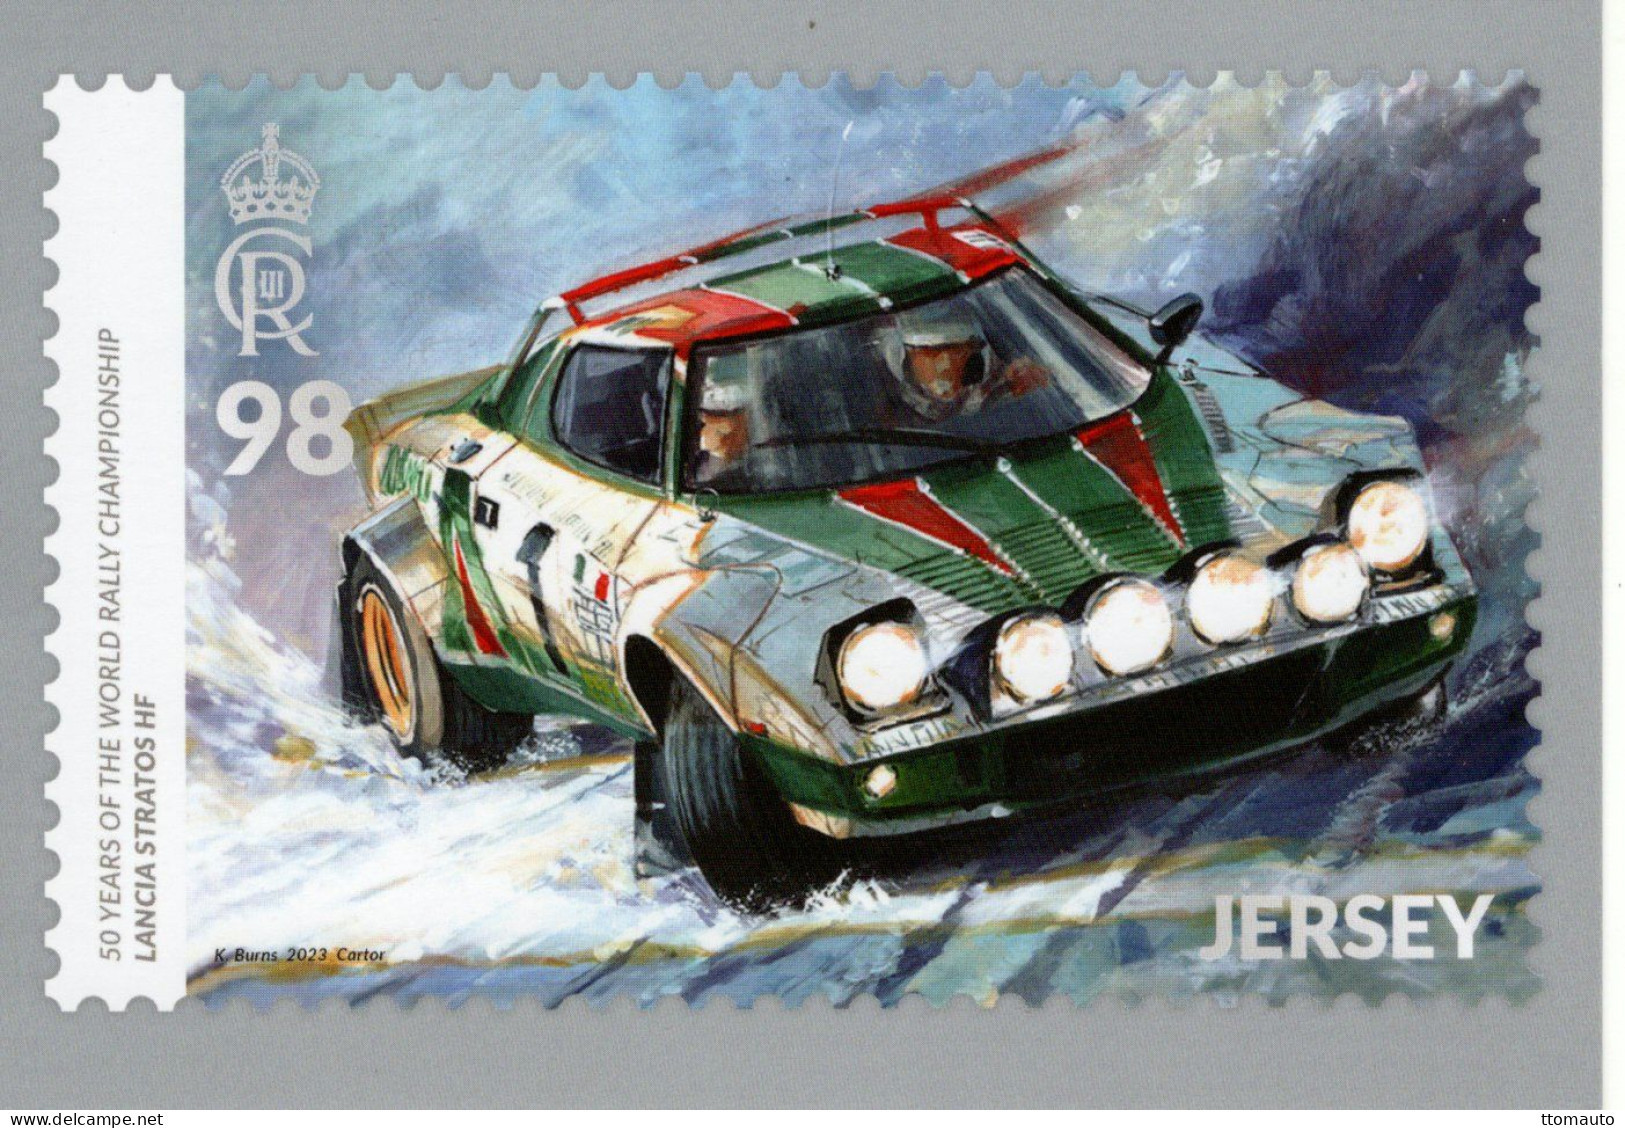 Lancia Stratos HF -  50 Years Of The World Rally Championship  - Jersey PHQ Postcard - CPM - Rally